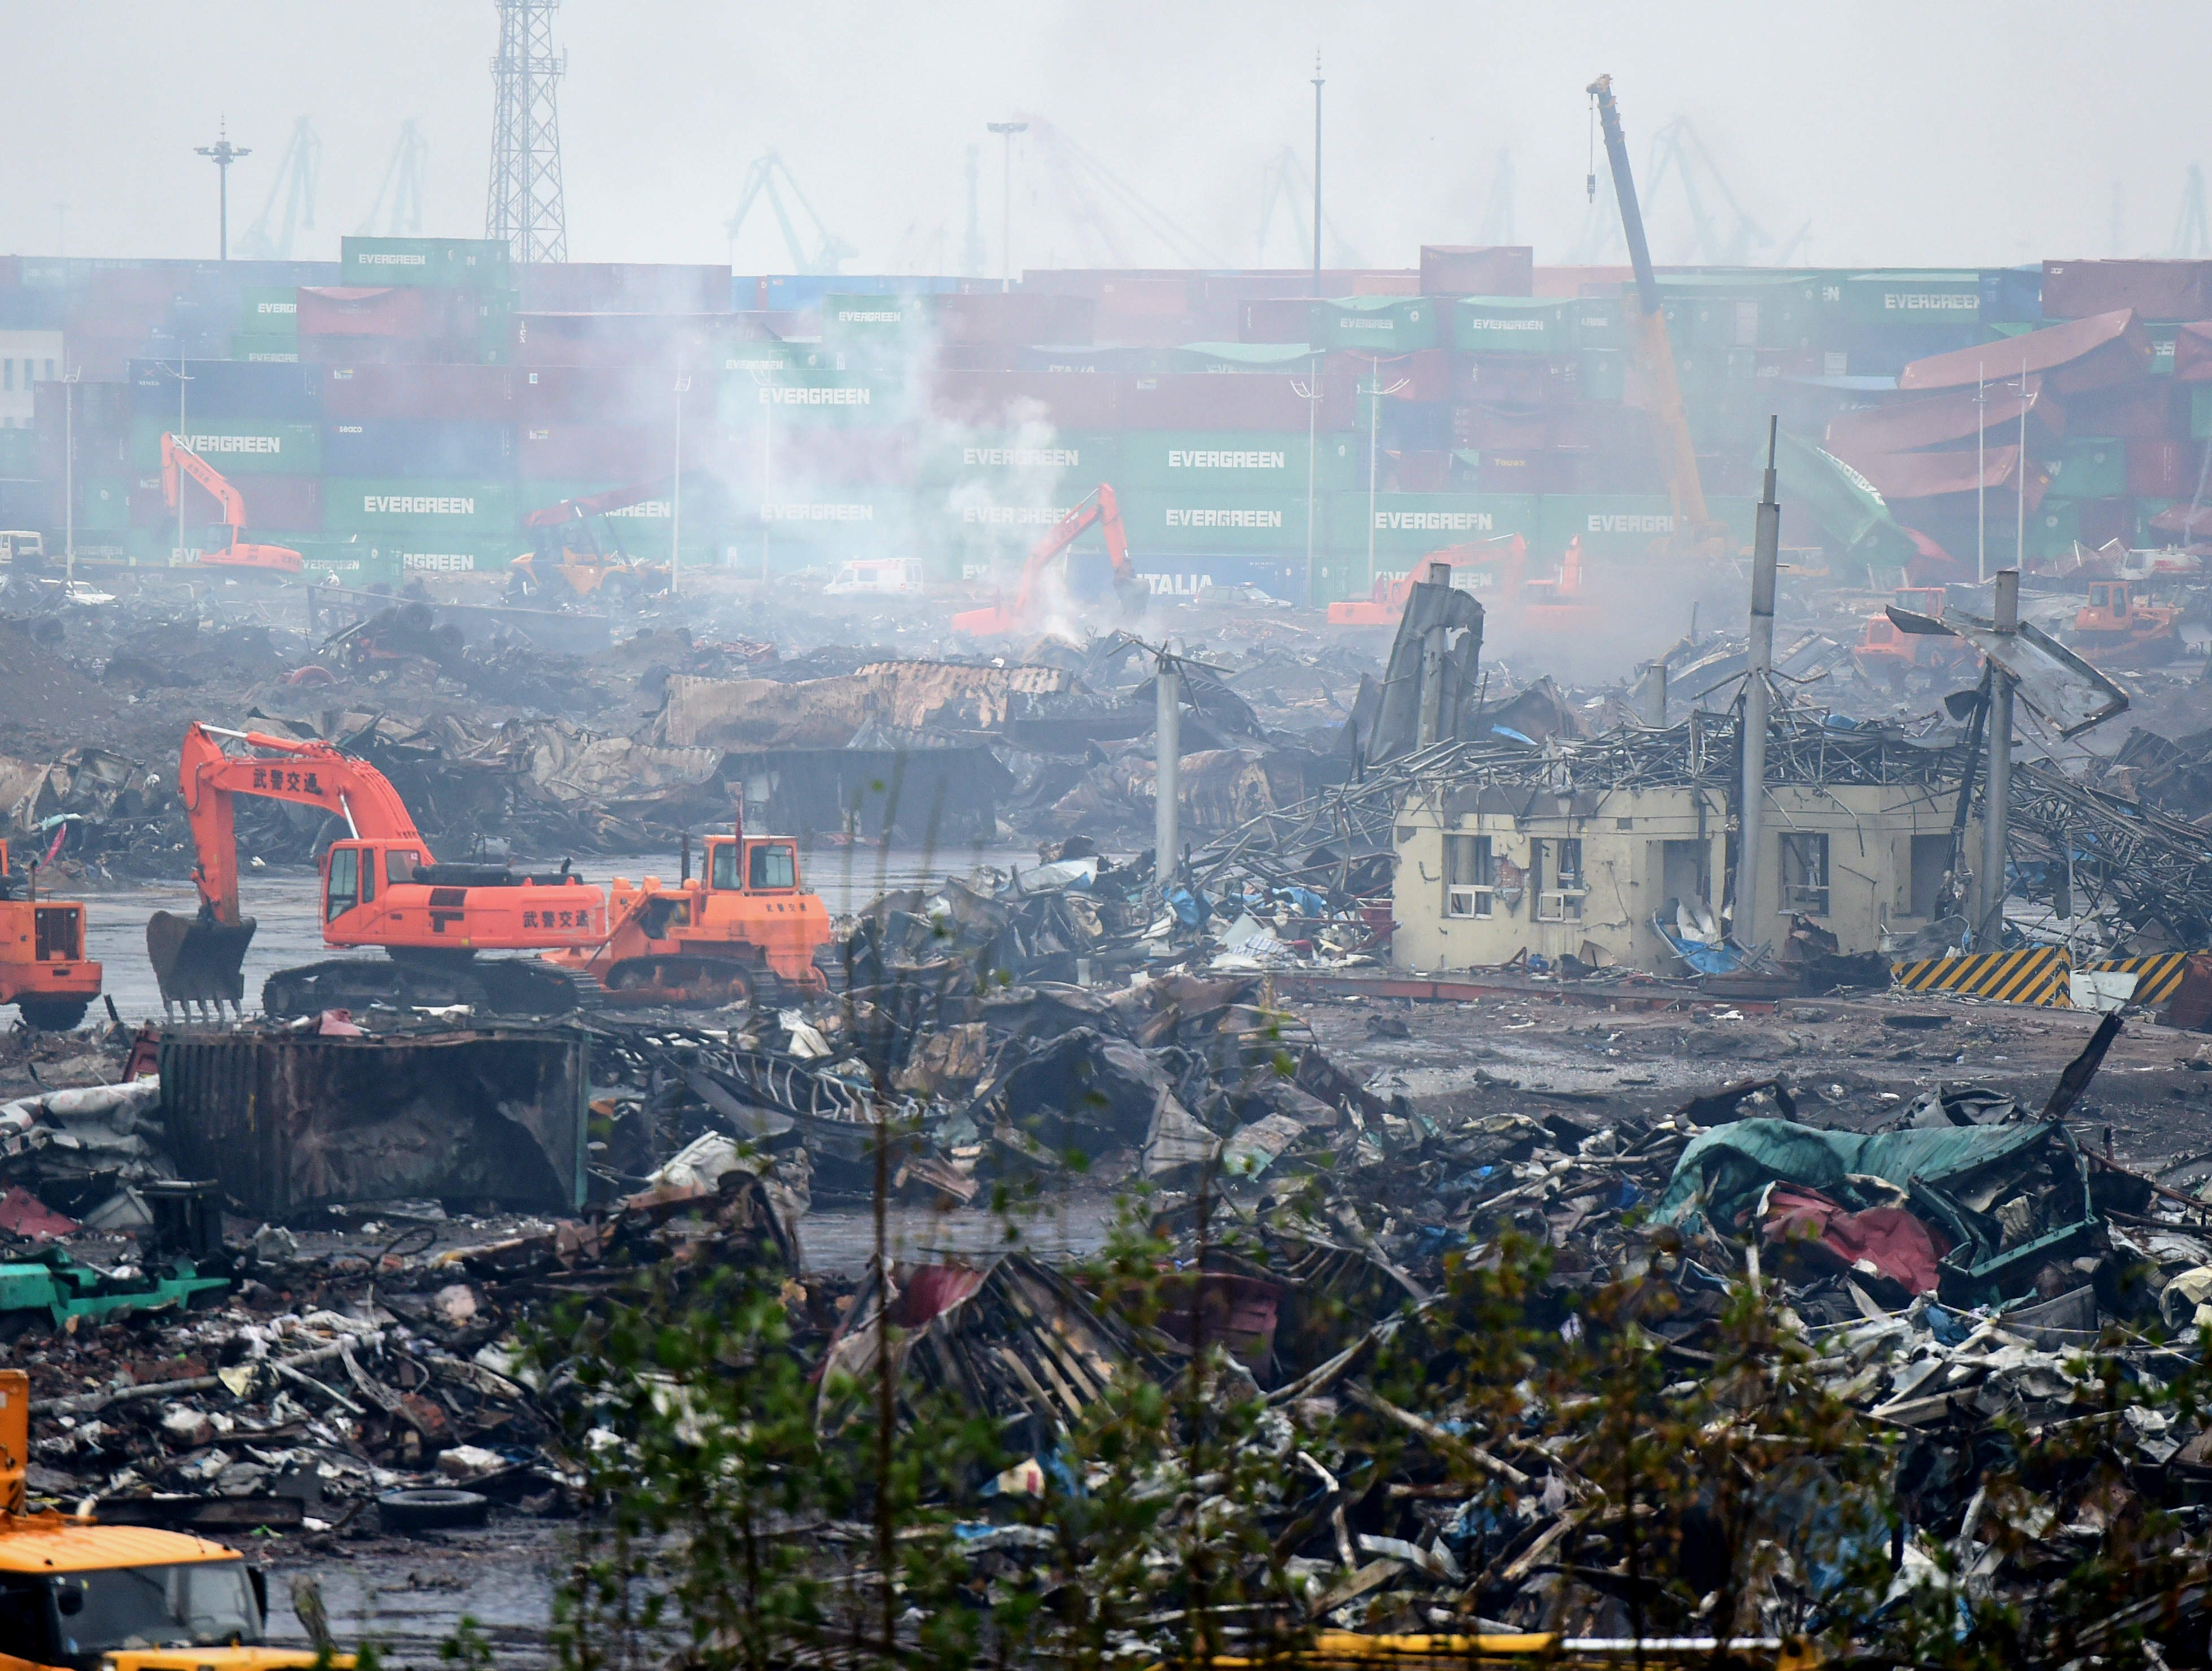 (150831) -- TIANJIN, Aug. 31, 2015 (Xinhua) -- Rescuers clean up debris at the warehouse explosion site of Tianjin, north China, Aug. 31, 2015. The death toll from the Tianjin warehouse explosions rose to 158 on Monday with 15 people still missing two weeks after the blasts, according to rescue authorities. (Xinhua/Zhang Chenlin)(mcg)